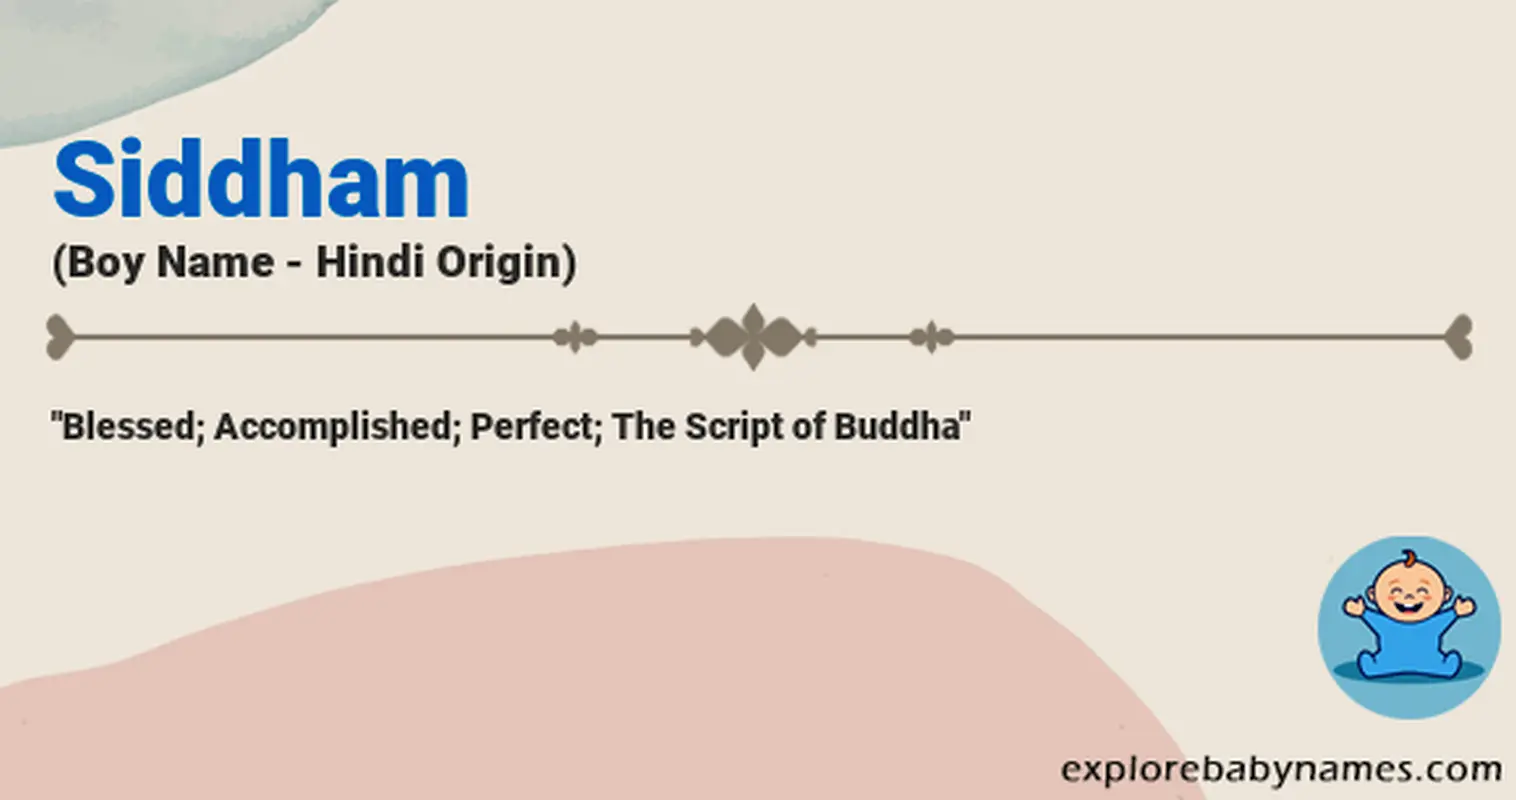 Meaning of Siddham